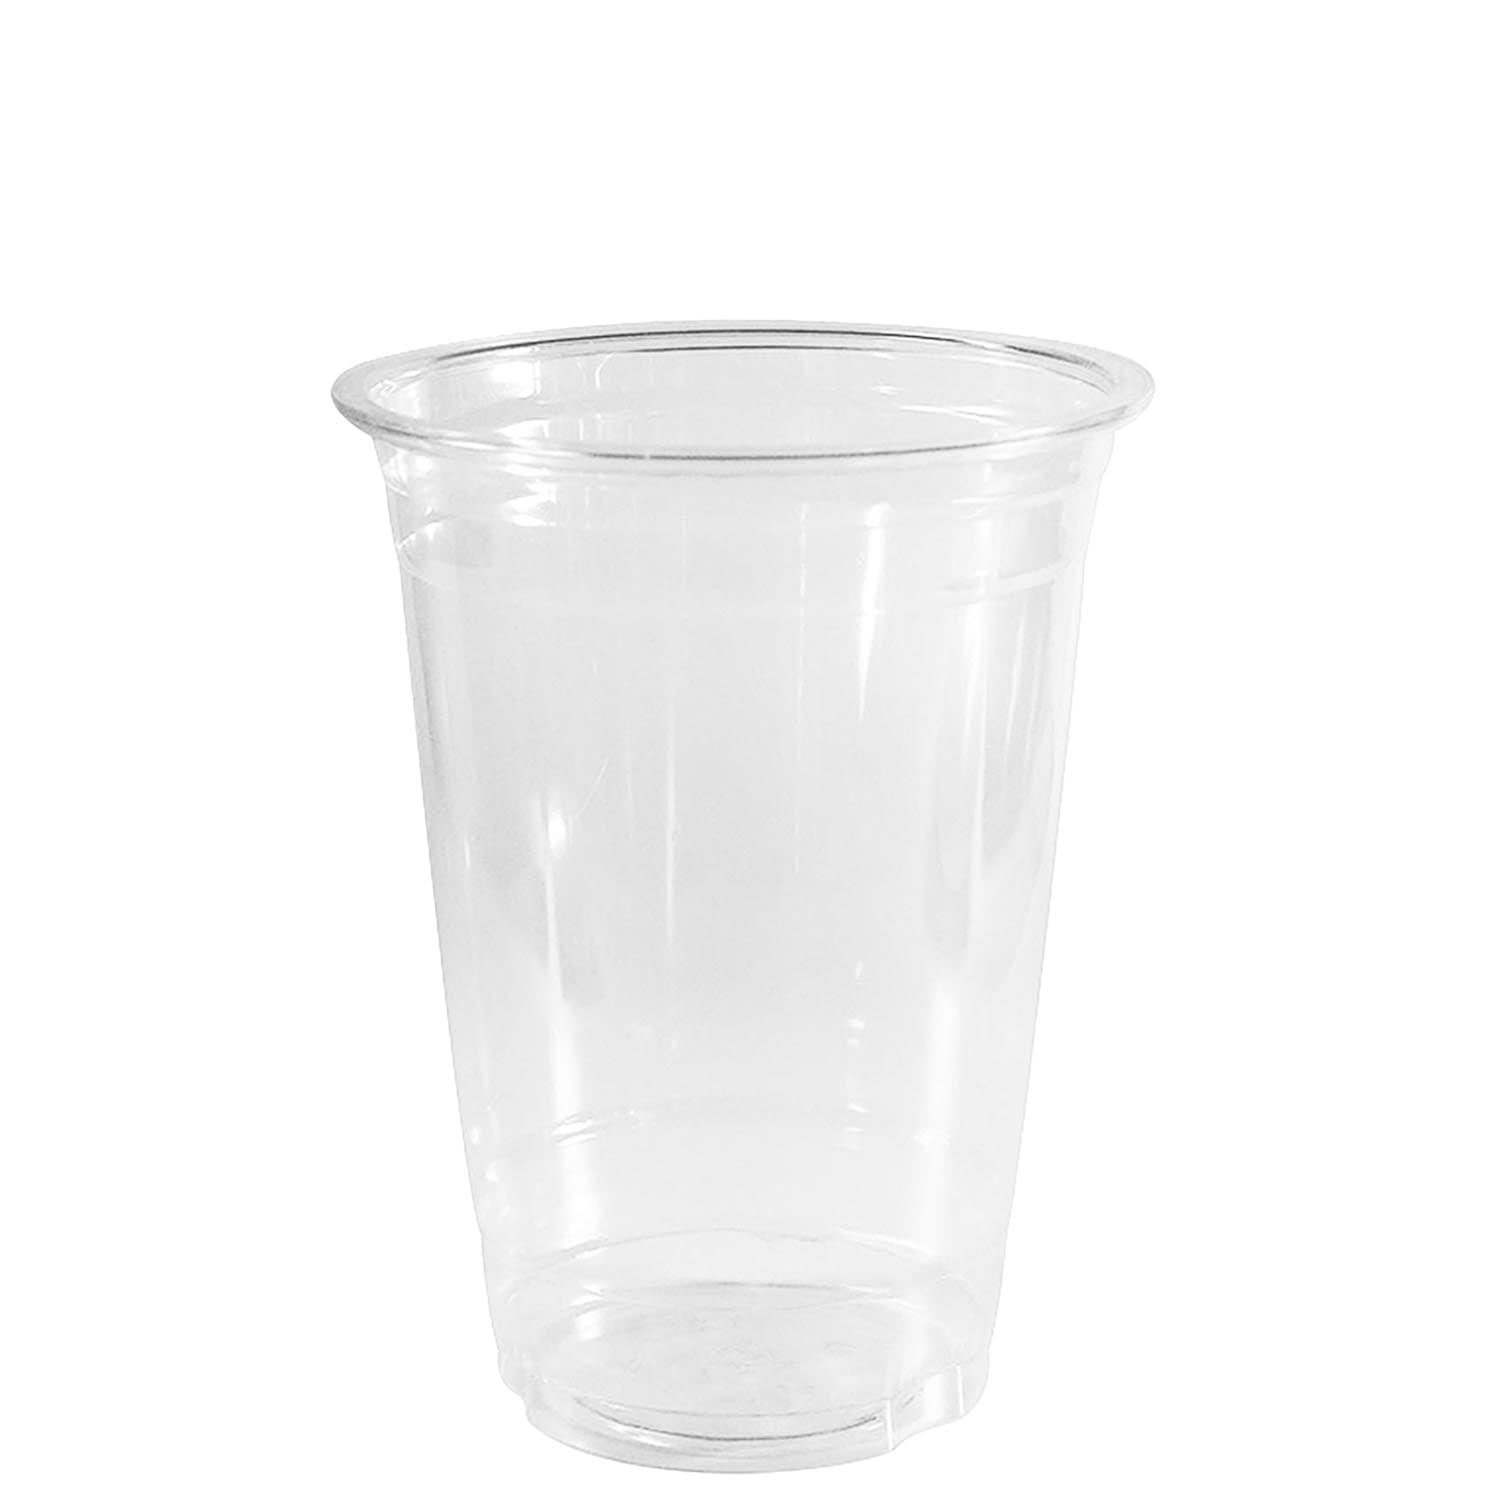 MONGKA 50 sets 450ml (16 oz) Clear disposable Plastic Cups With